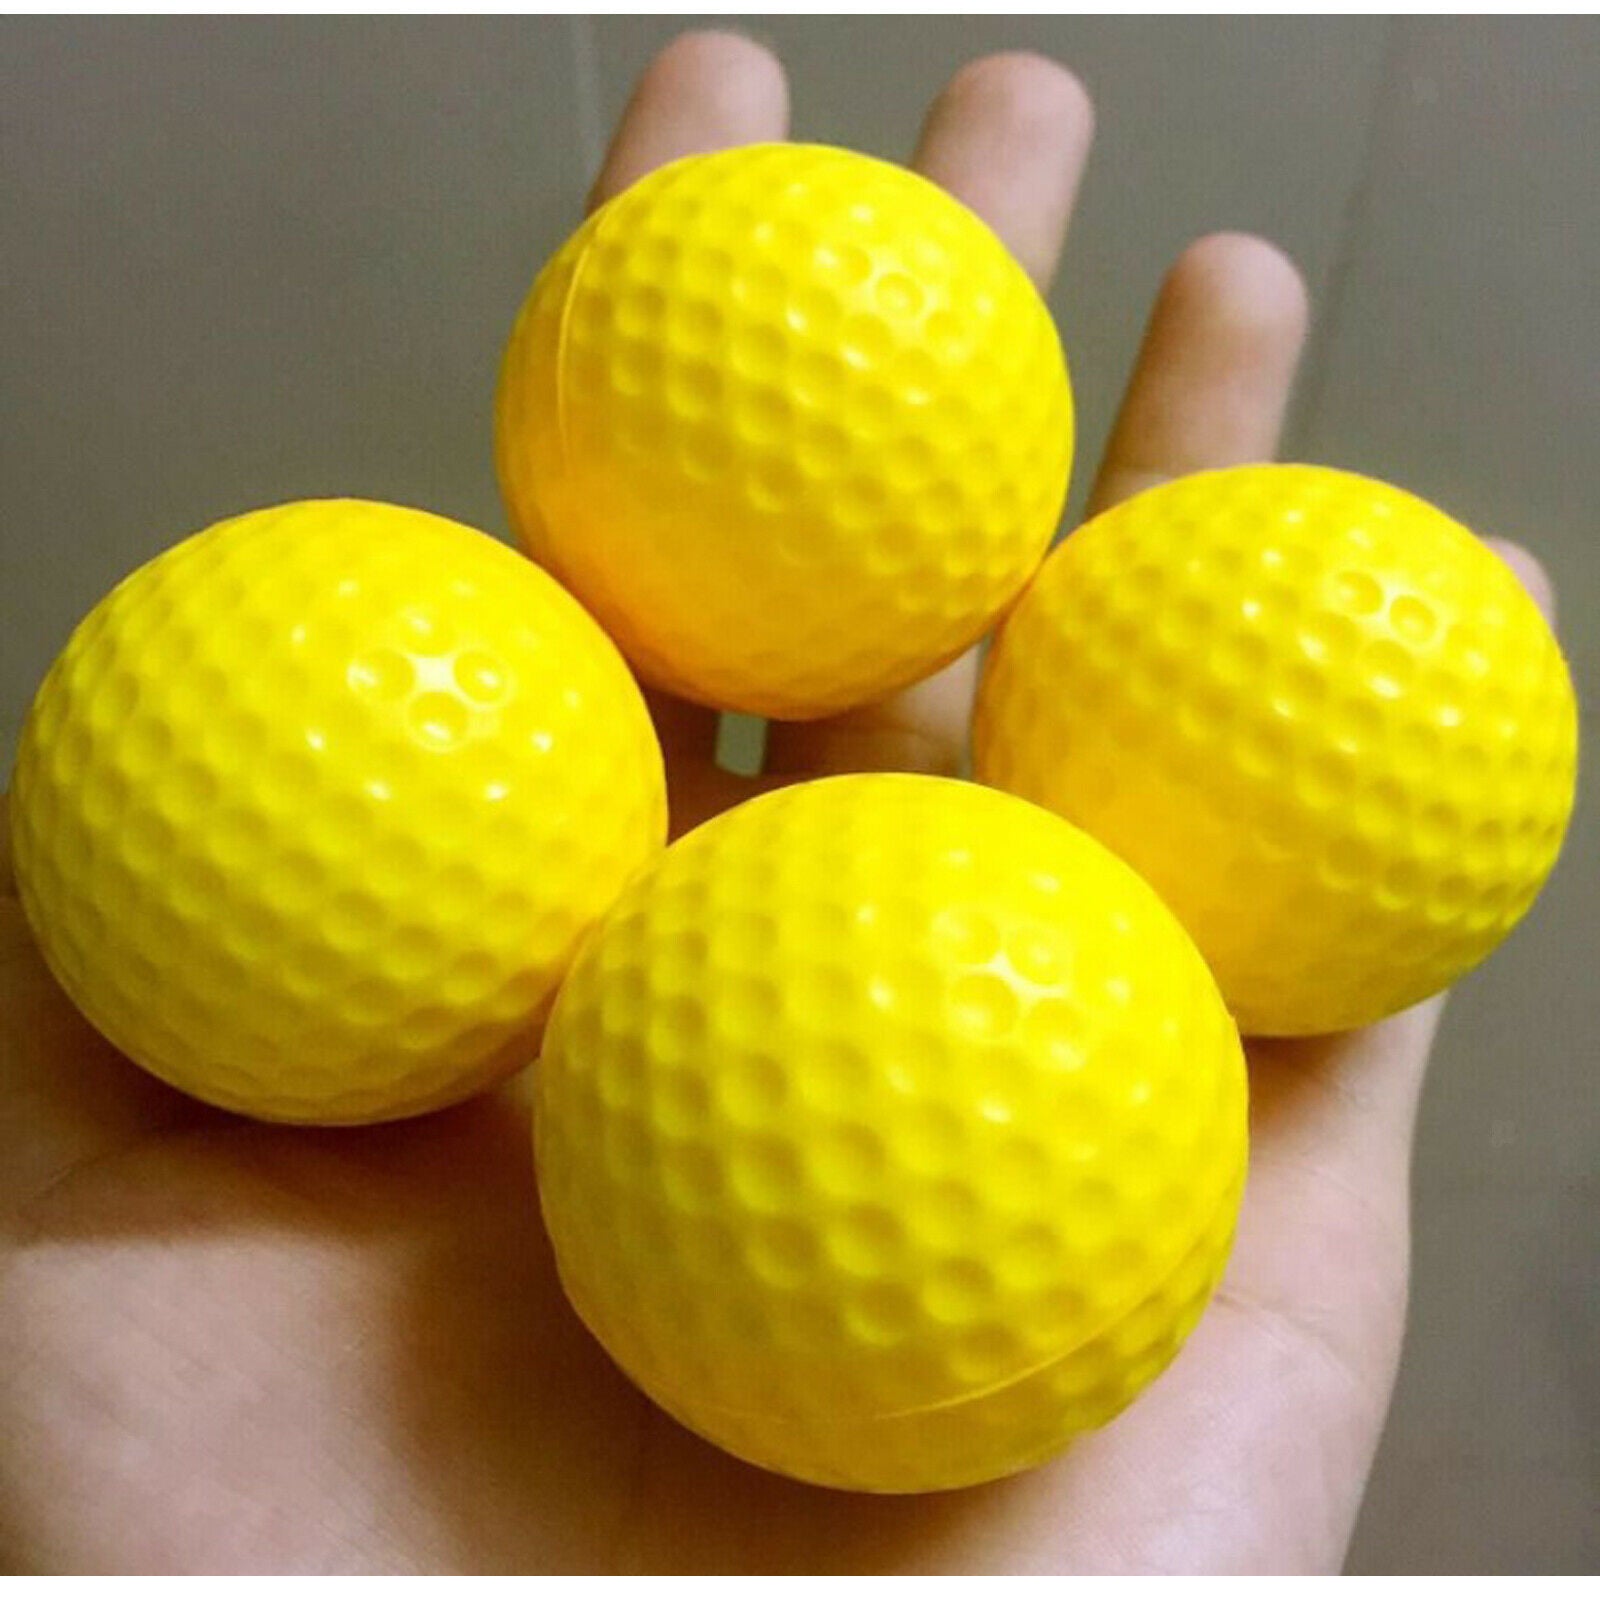 10 lot Golf Training Ball Lightweight Ï†4.2cm for Indoor Exercise Pets Play